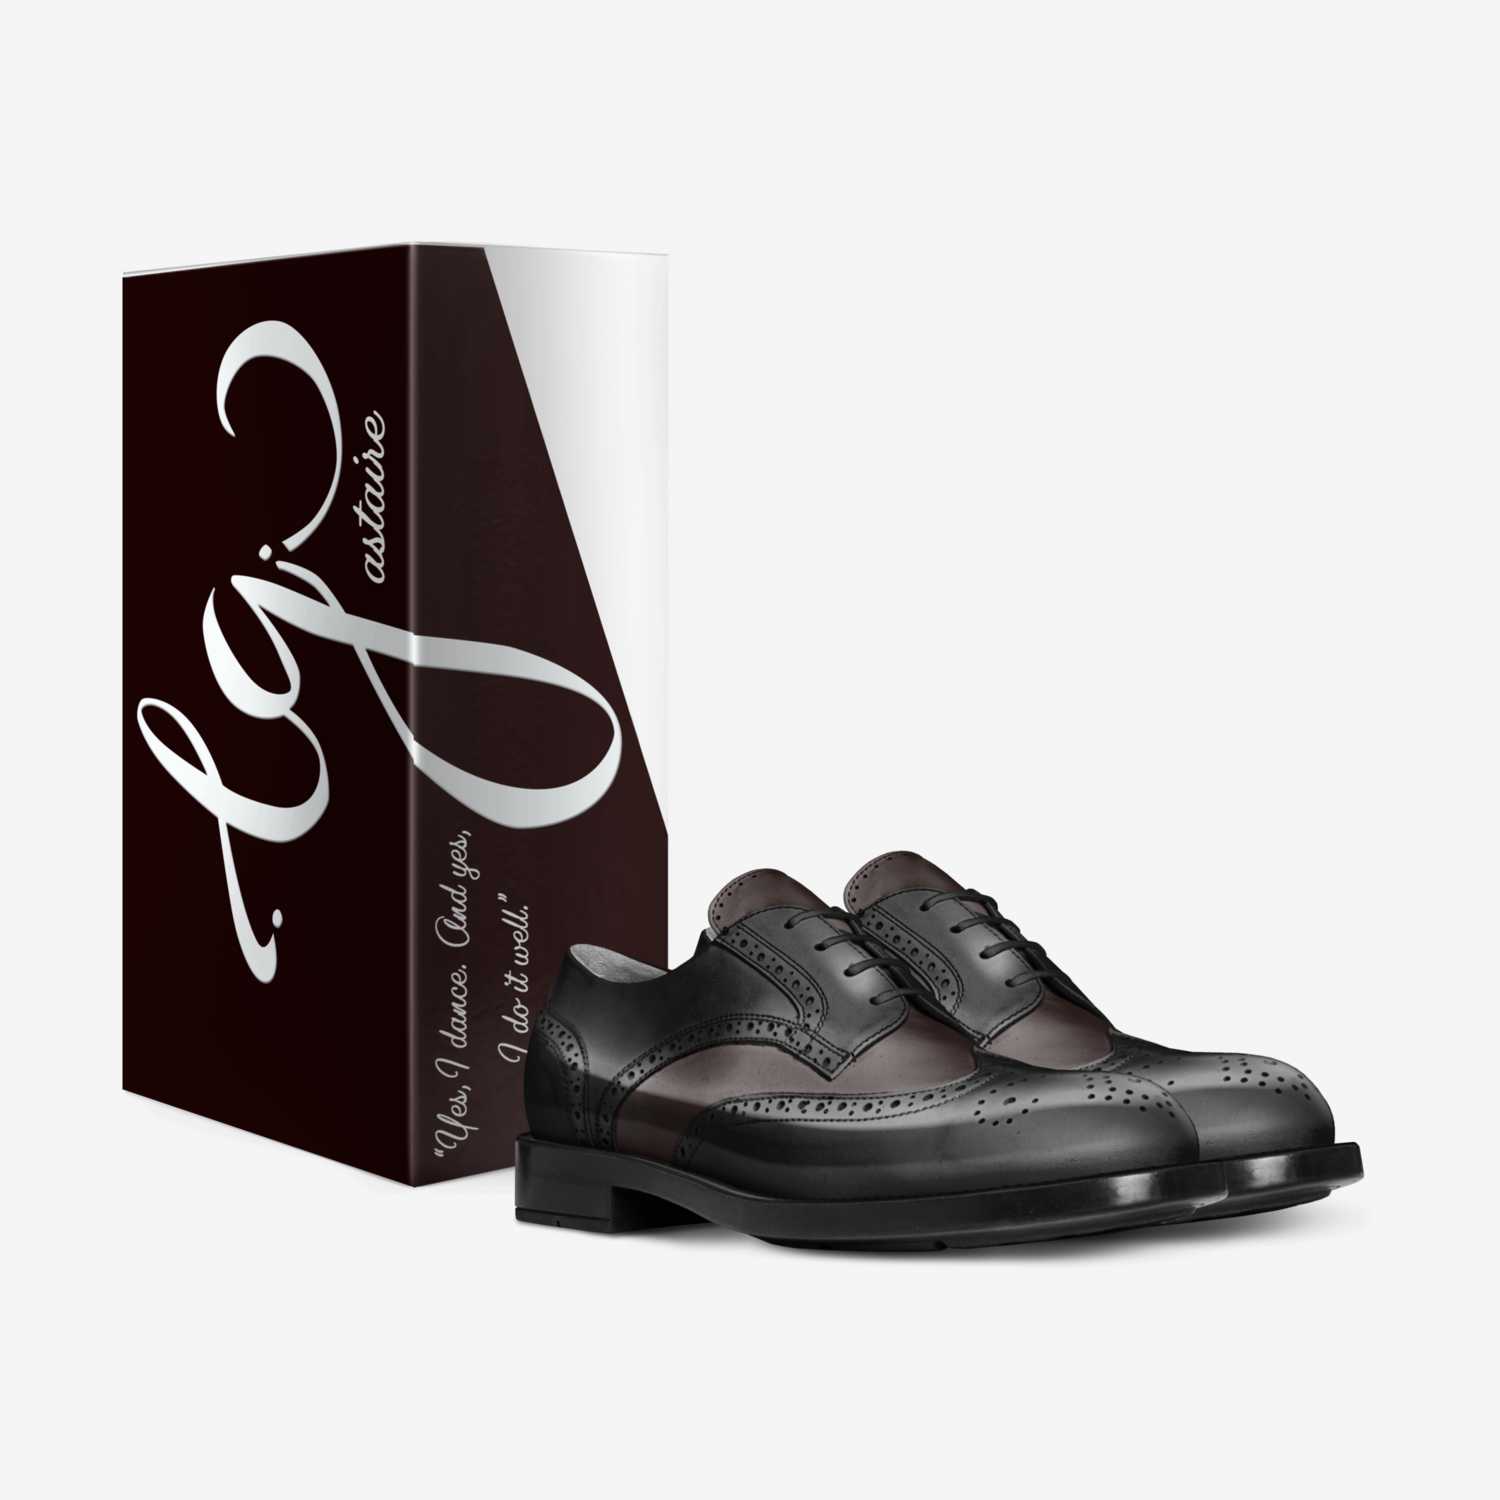 LG Astaire custom made in Italy shoes by Lady Grey | Box view